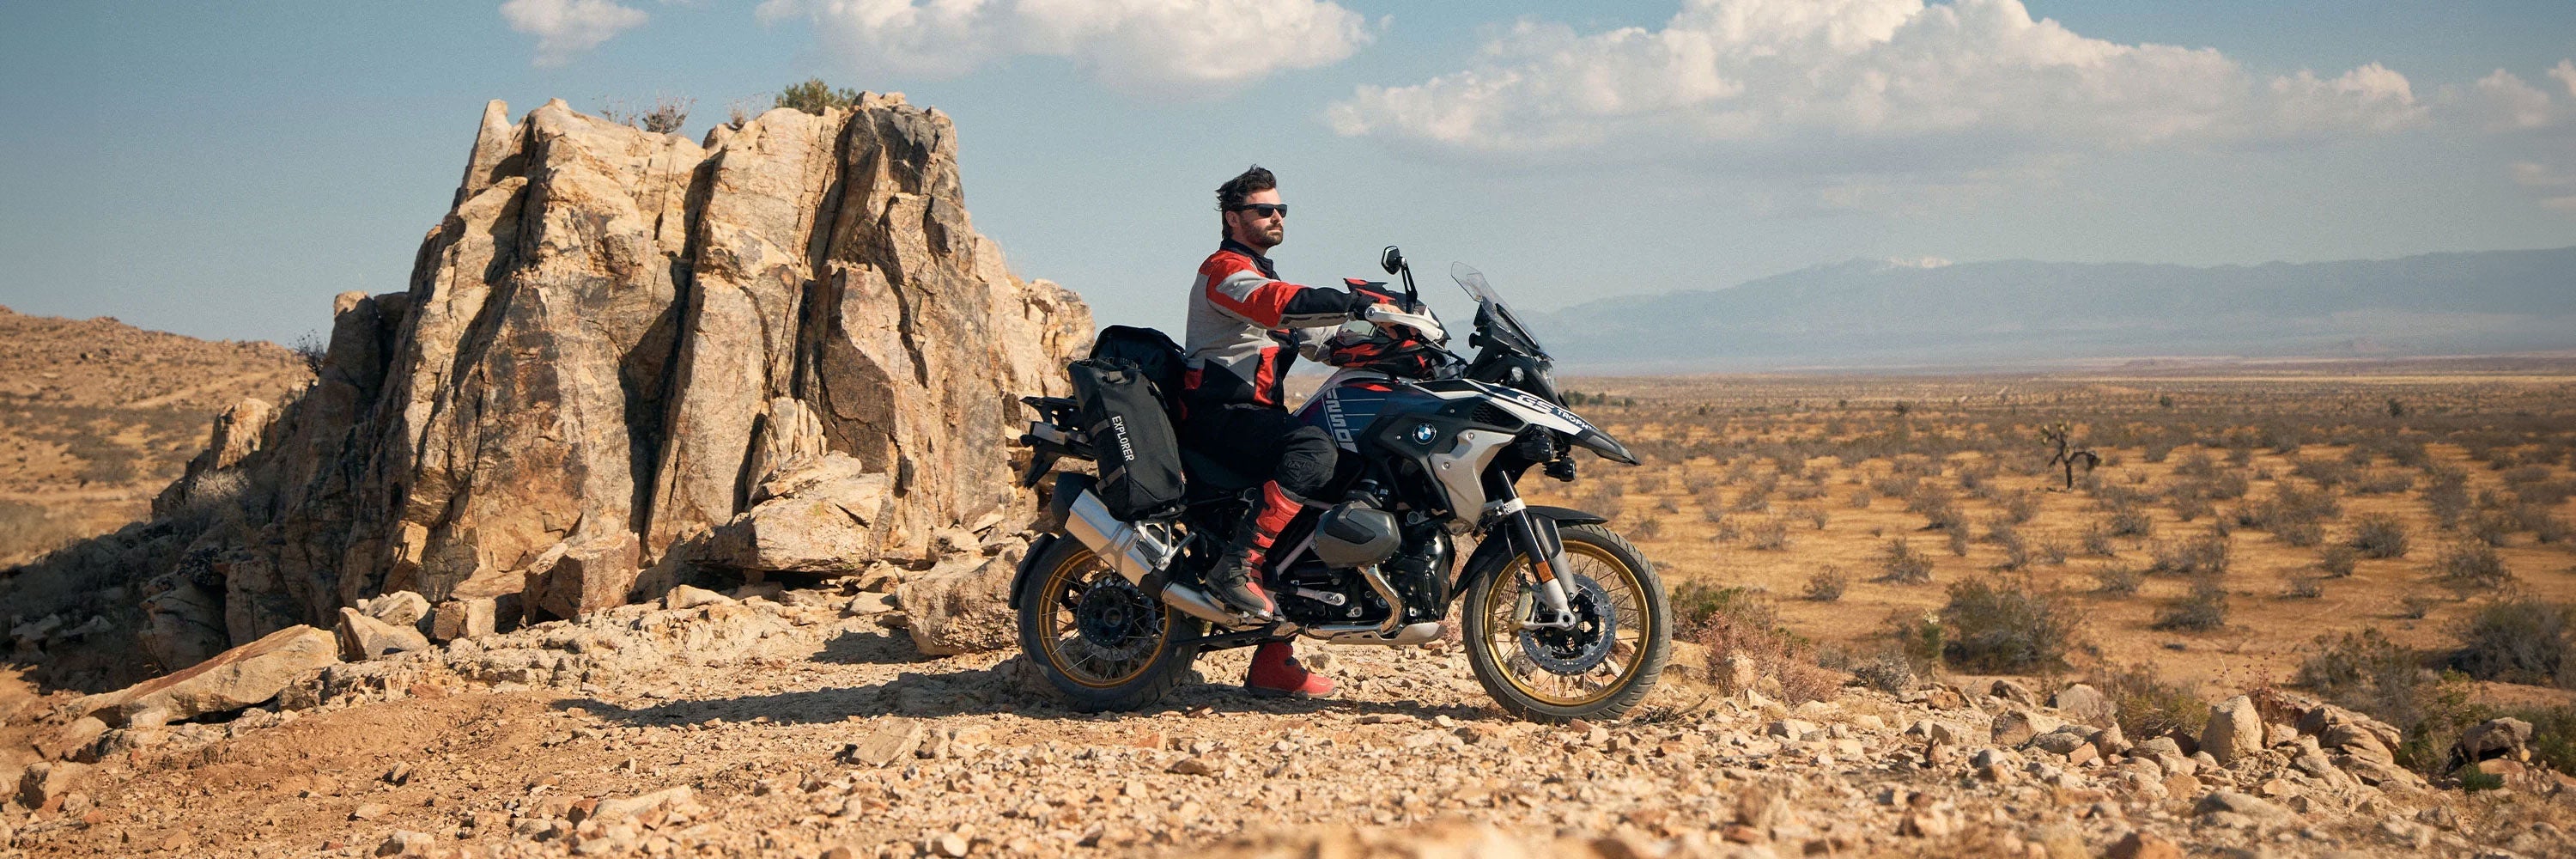 Dual Sports with Rack Luggage Bags